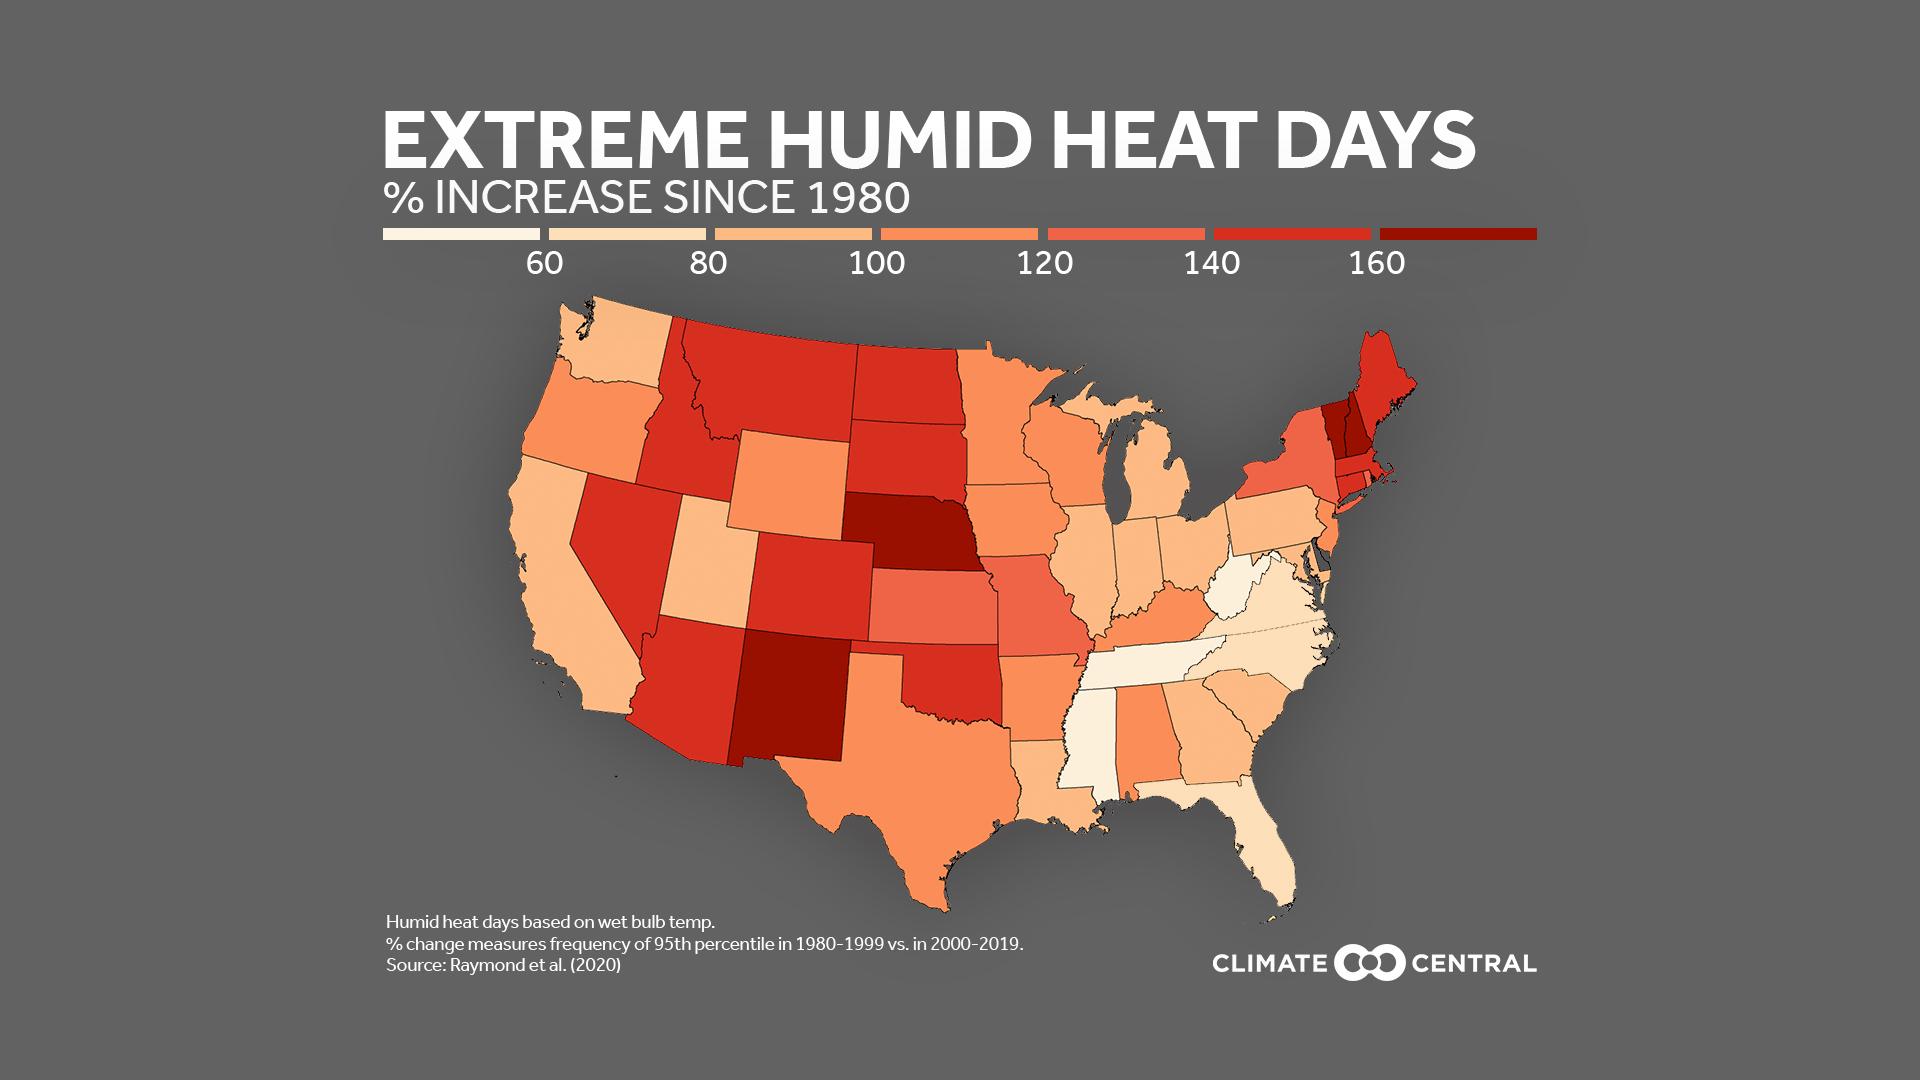 The State-By-State Rise in Extreme Humid Heat - Humid Heat Extremes on the Rise